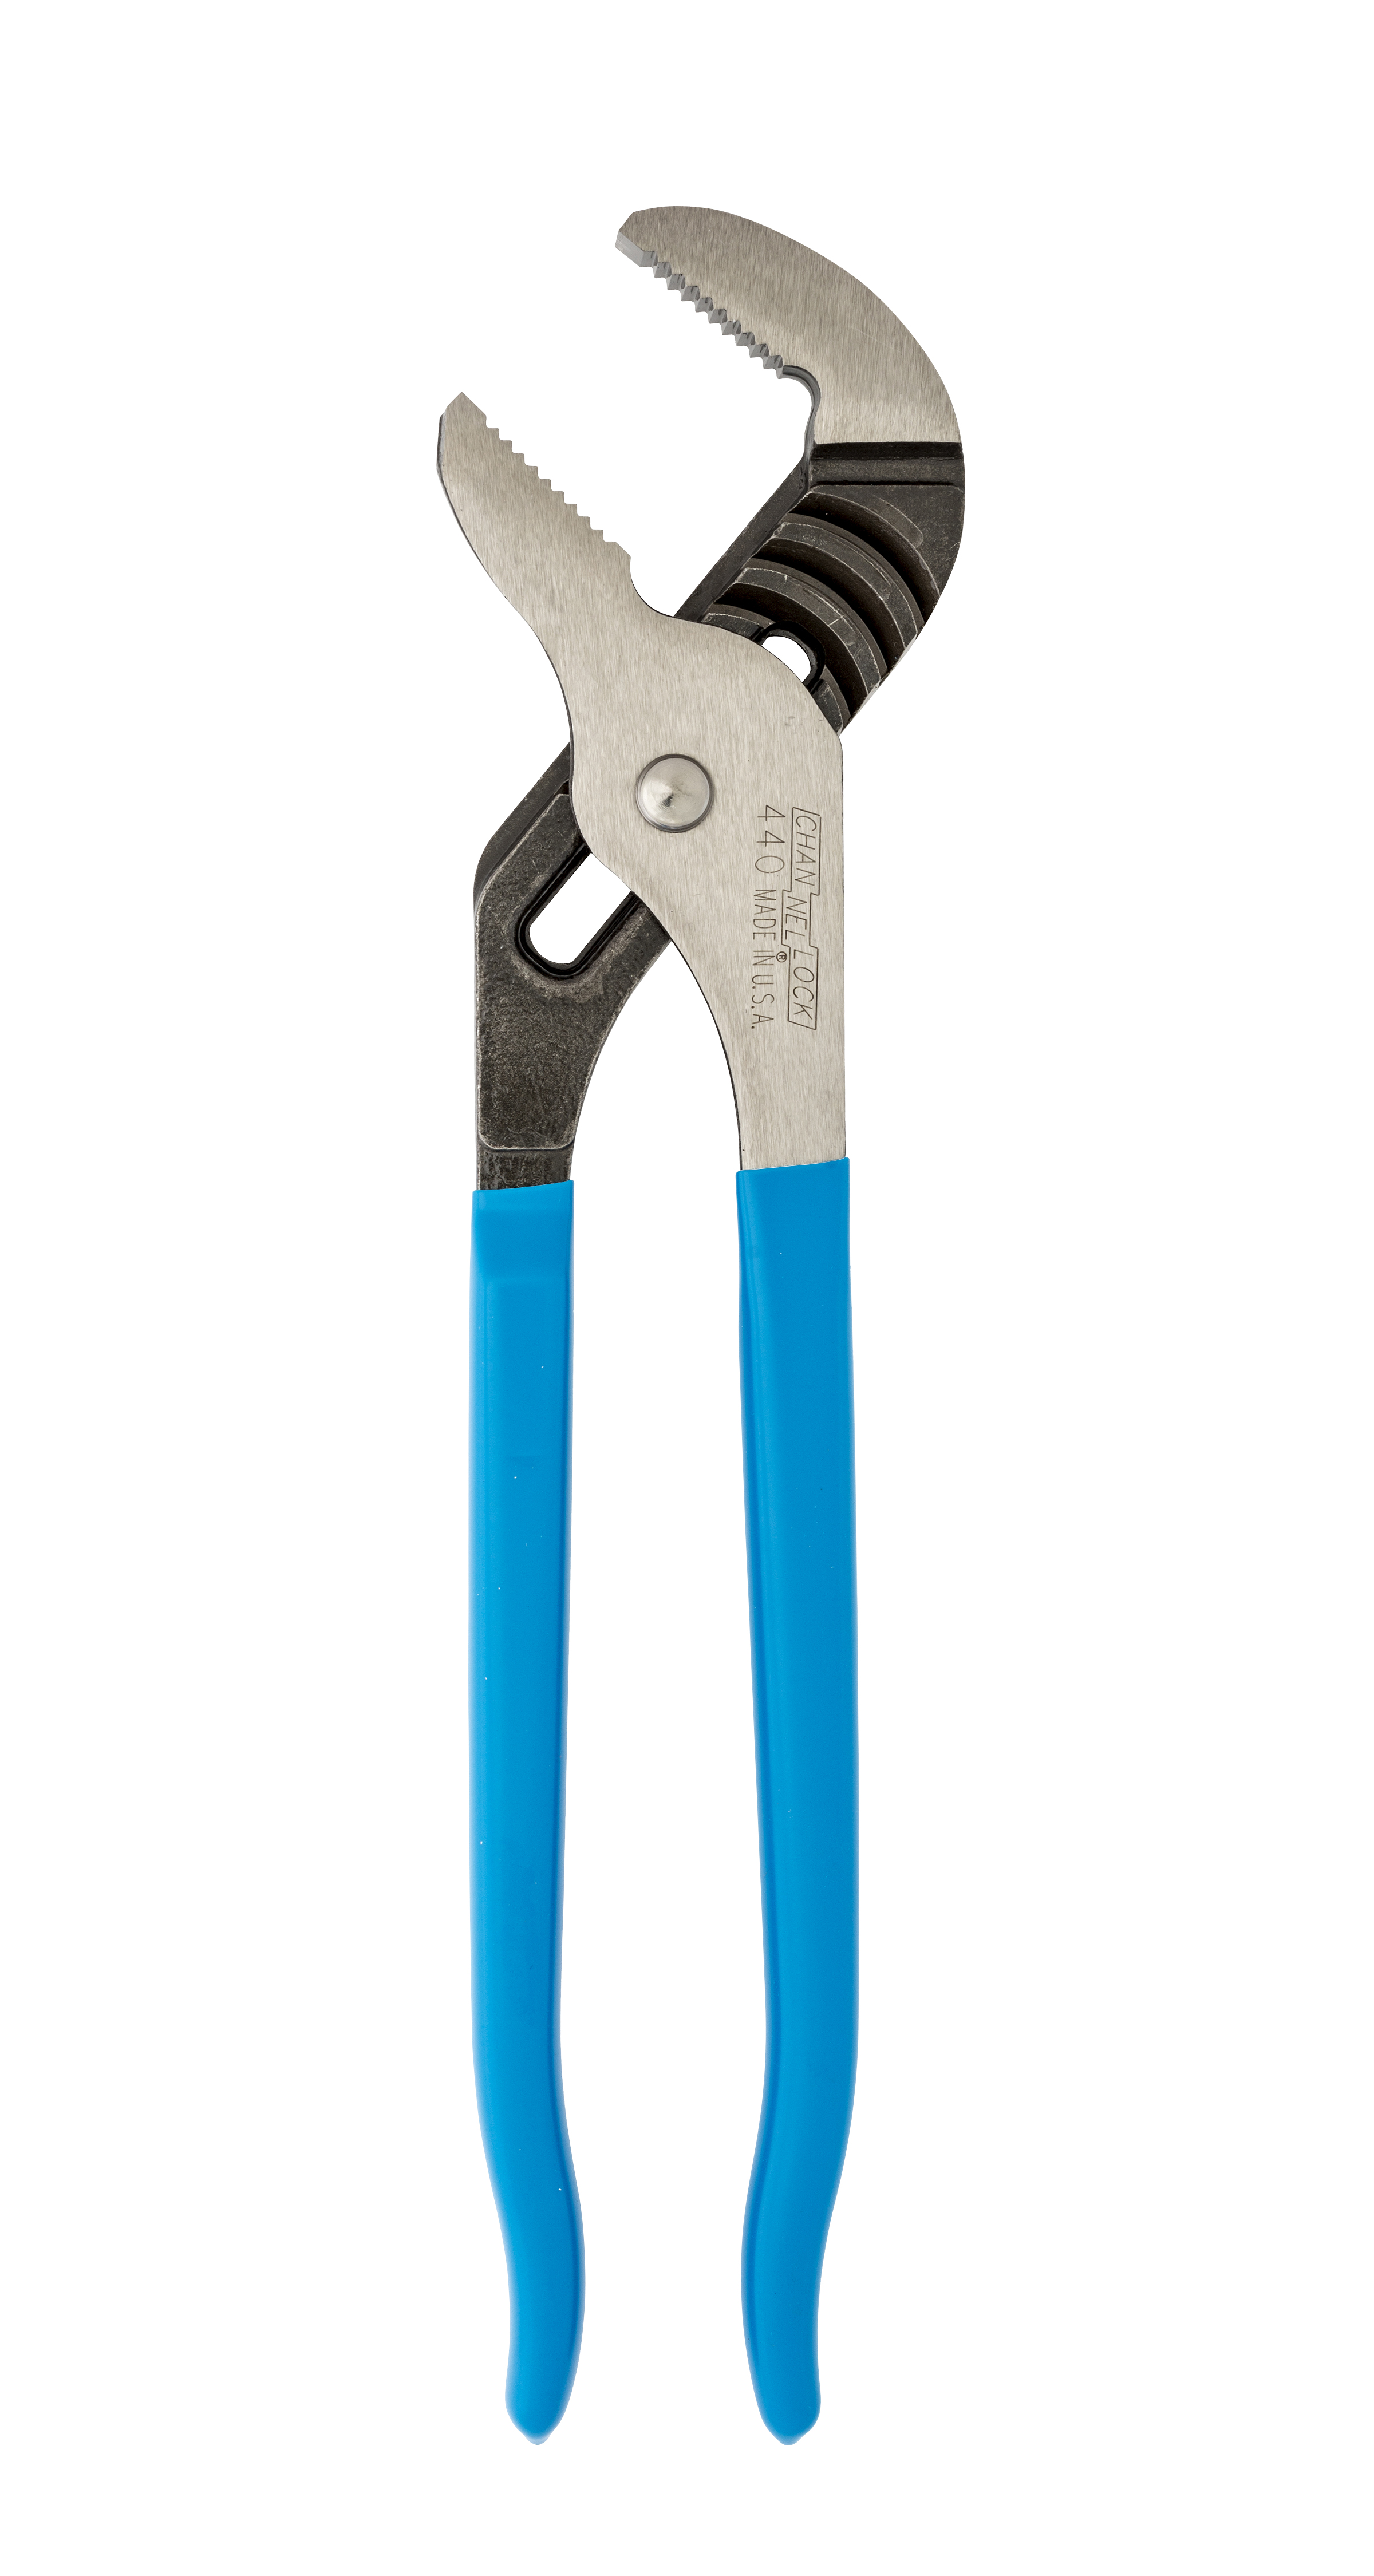 12" Straight Jaw Tongue & Groove Plier